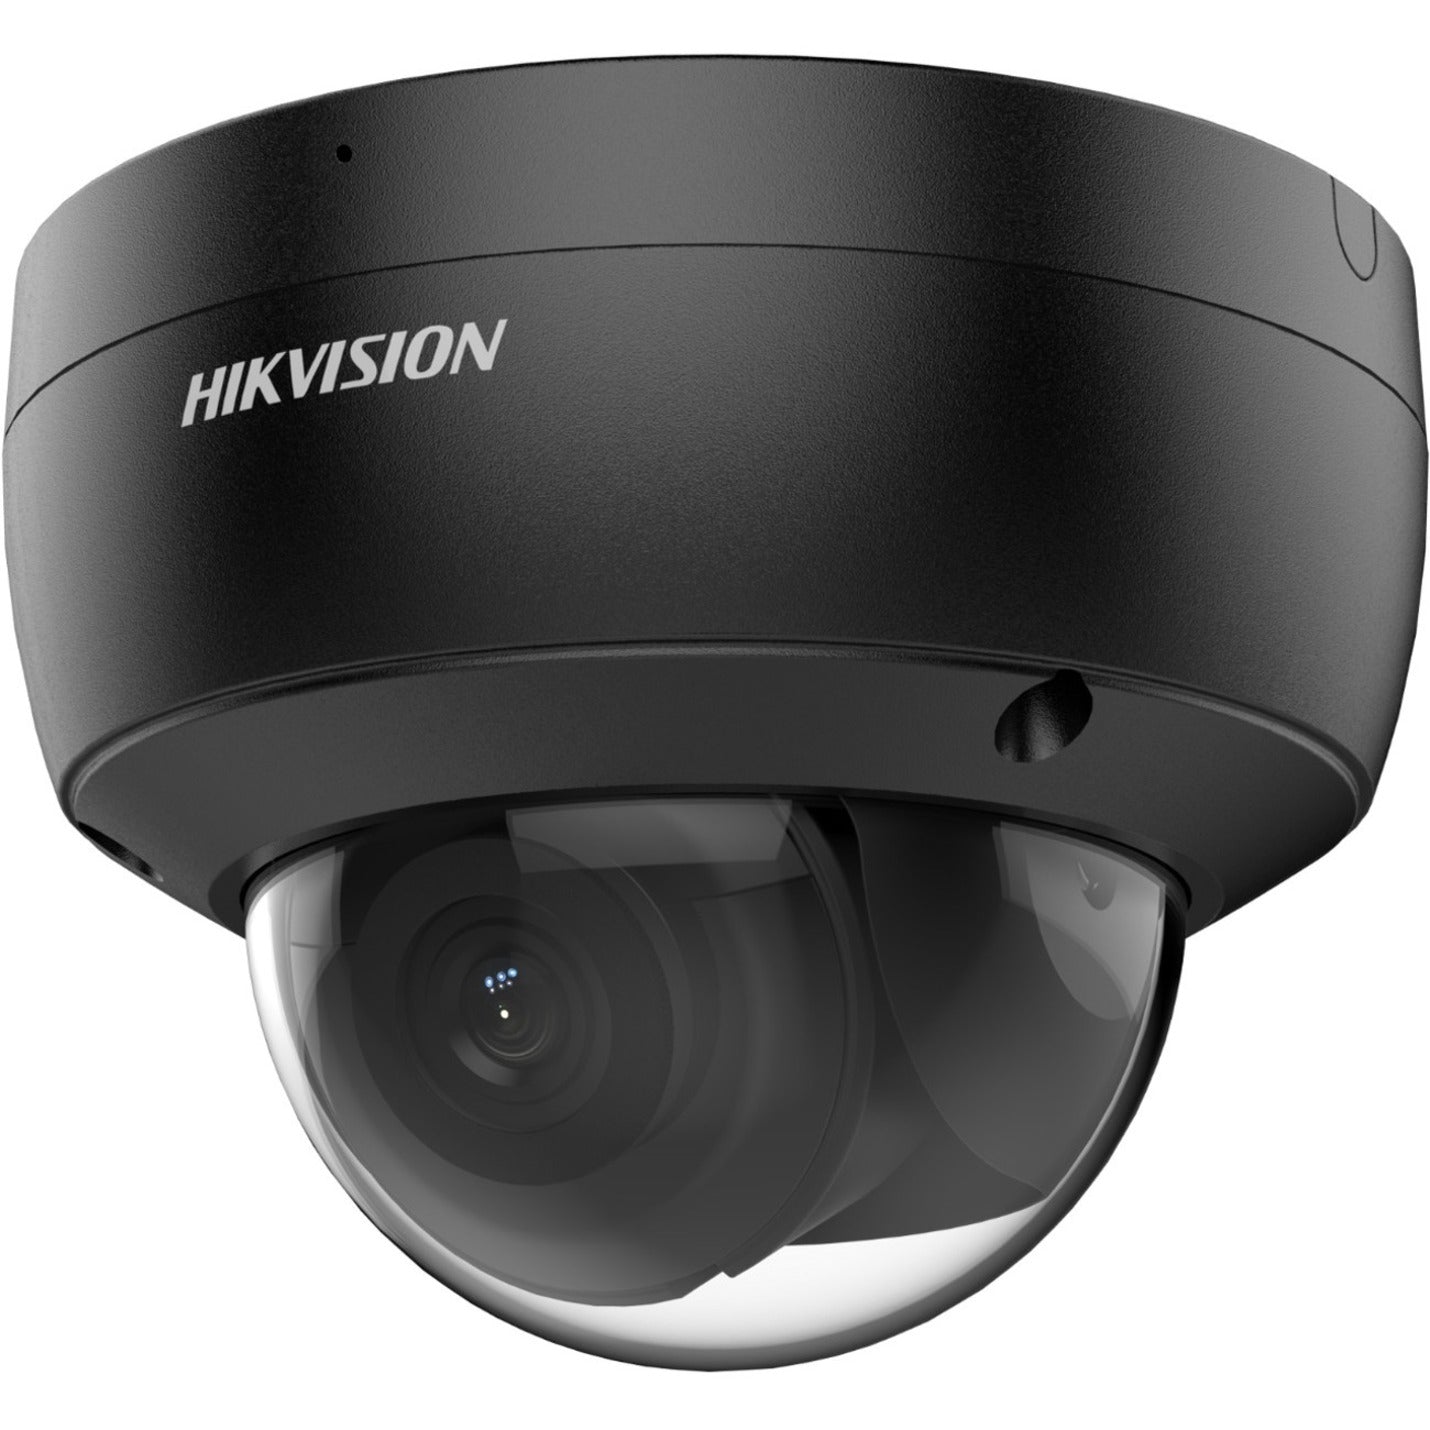 Hikvision DS-2CD2123G2-IU 2.8MM EasyIP 2MP EXIR Fixed Dome Network Camera, Full HD, Night Vision, Built-in Microphone, IP67 Waterproof